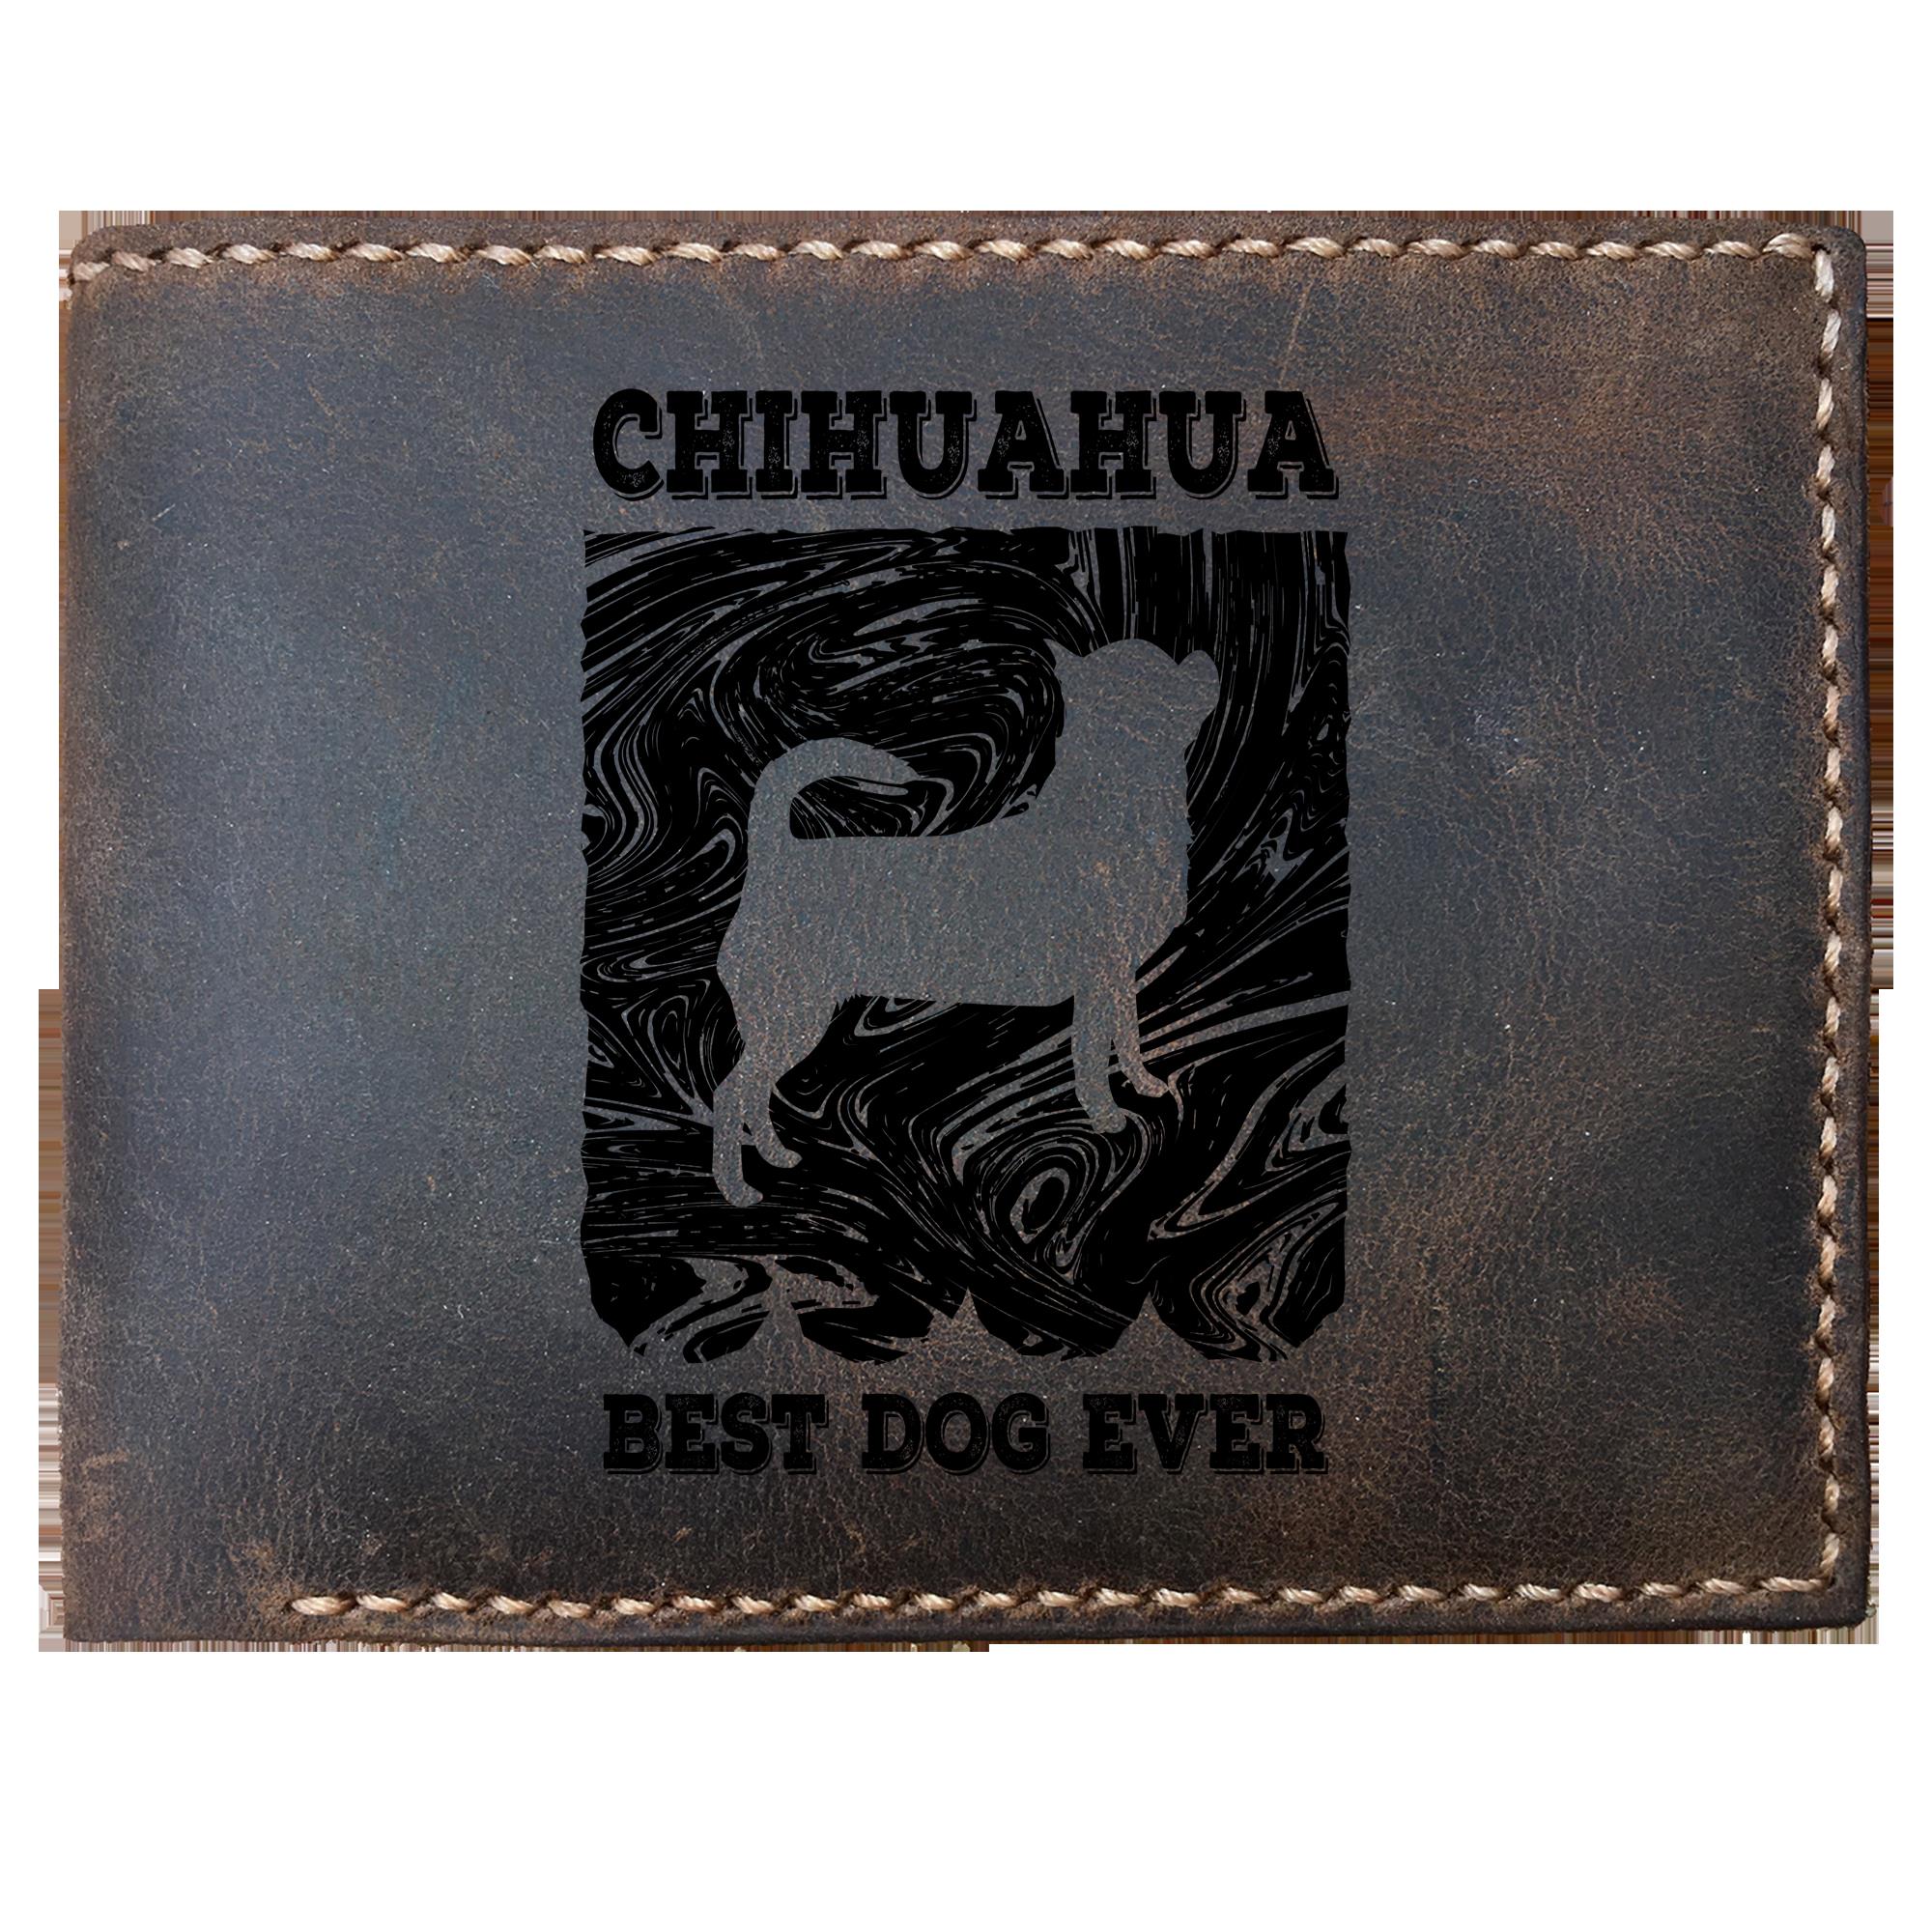 Skitongifts Funny Custom Laser Engraved Bifold Leather Wallet For Men, Chihuahua Best Dog Ever Vintage For Dog Lover